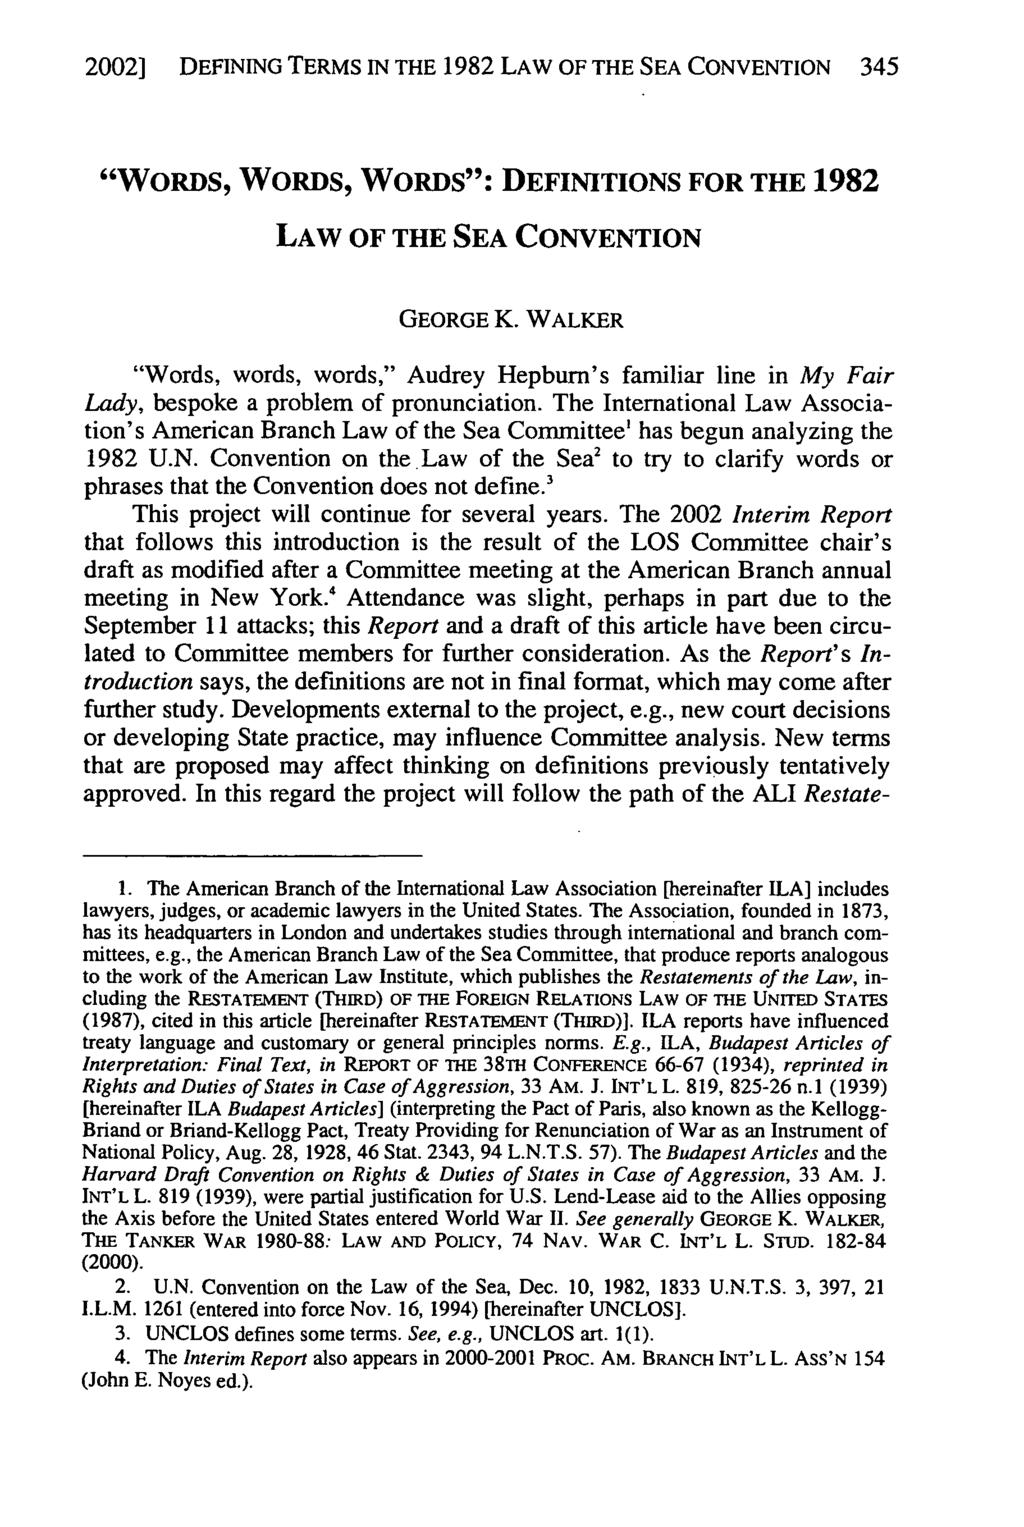 2002] DEFINING Walker TERMS and Noyes: IN Definitions THE 1982 for the 1982 Law of the Sea Convention LAW OF THE SEA CONVENTION 345 "WoRDs, WoRDs, WoRDs": DEFINITIONS FOR THE 1982 LAW OF THE SEA